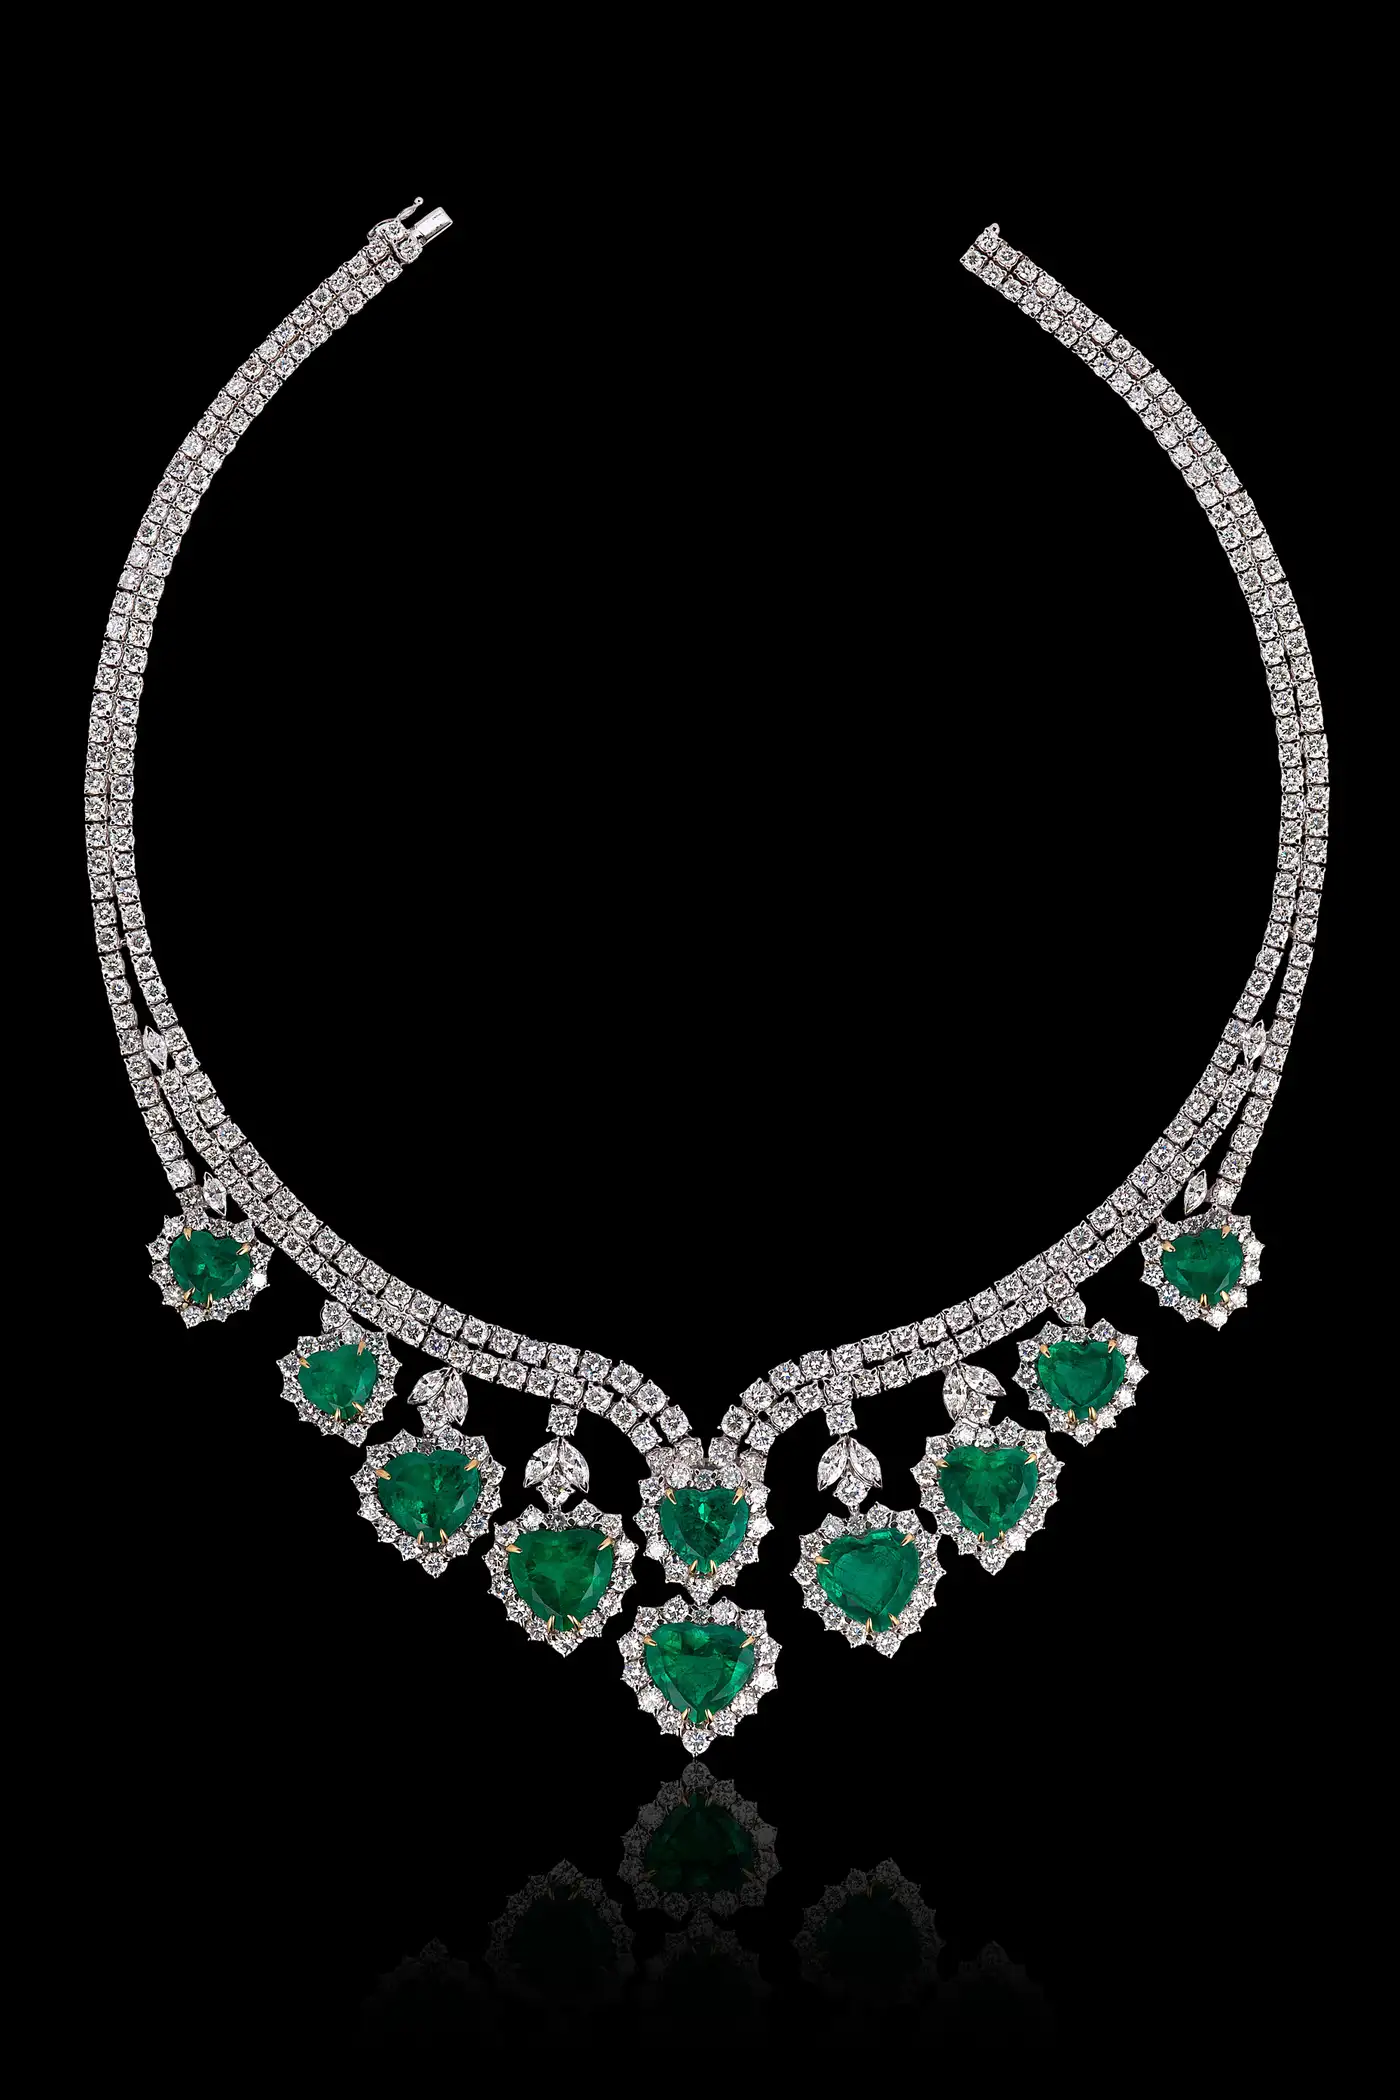 Andreoli-Heart-Shape-Colombian-Emerald-Diamond-Necklace-CDC-Certified-18Kt-Gold-5.webp